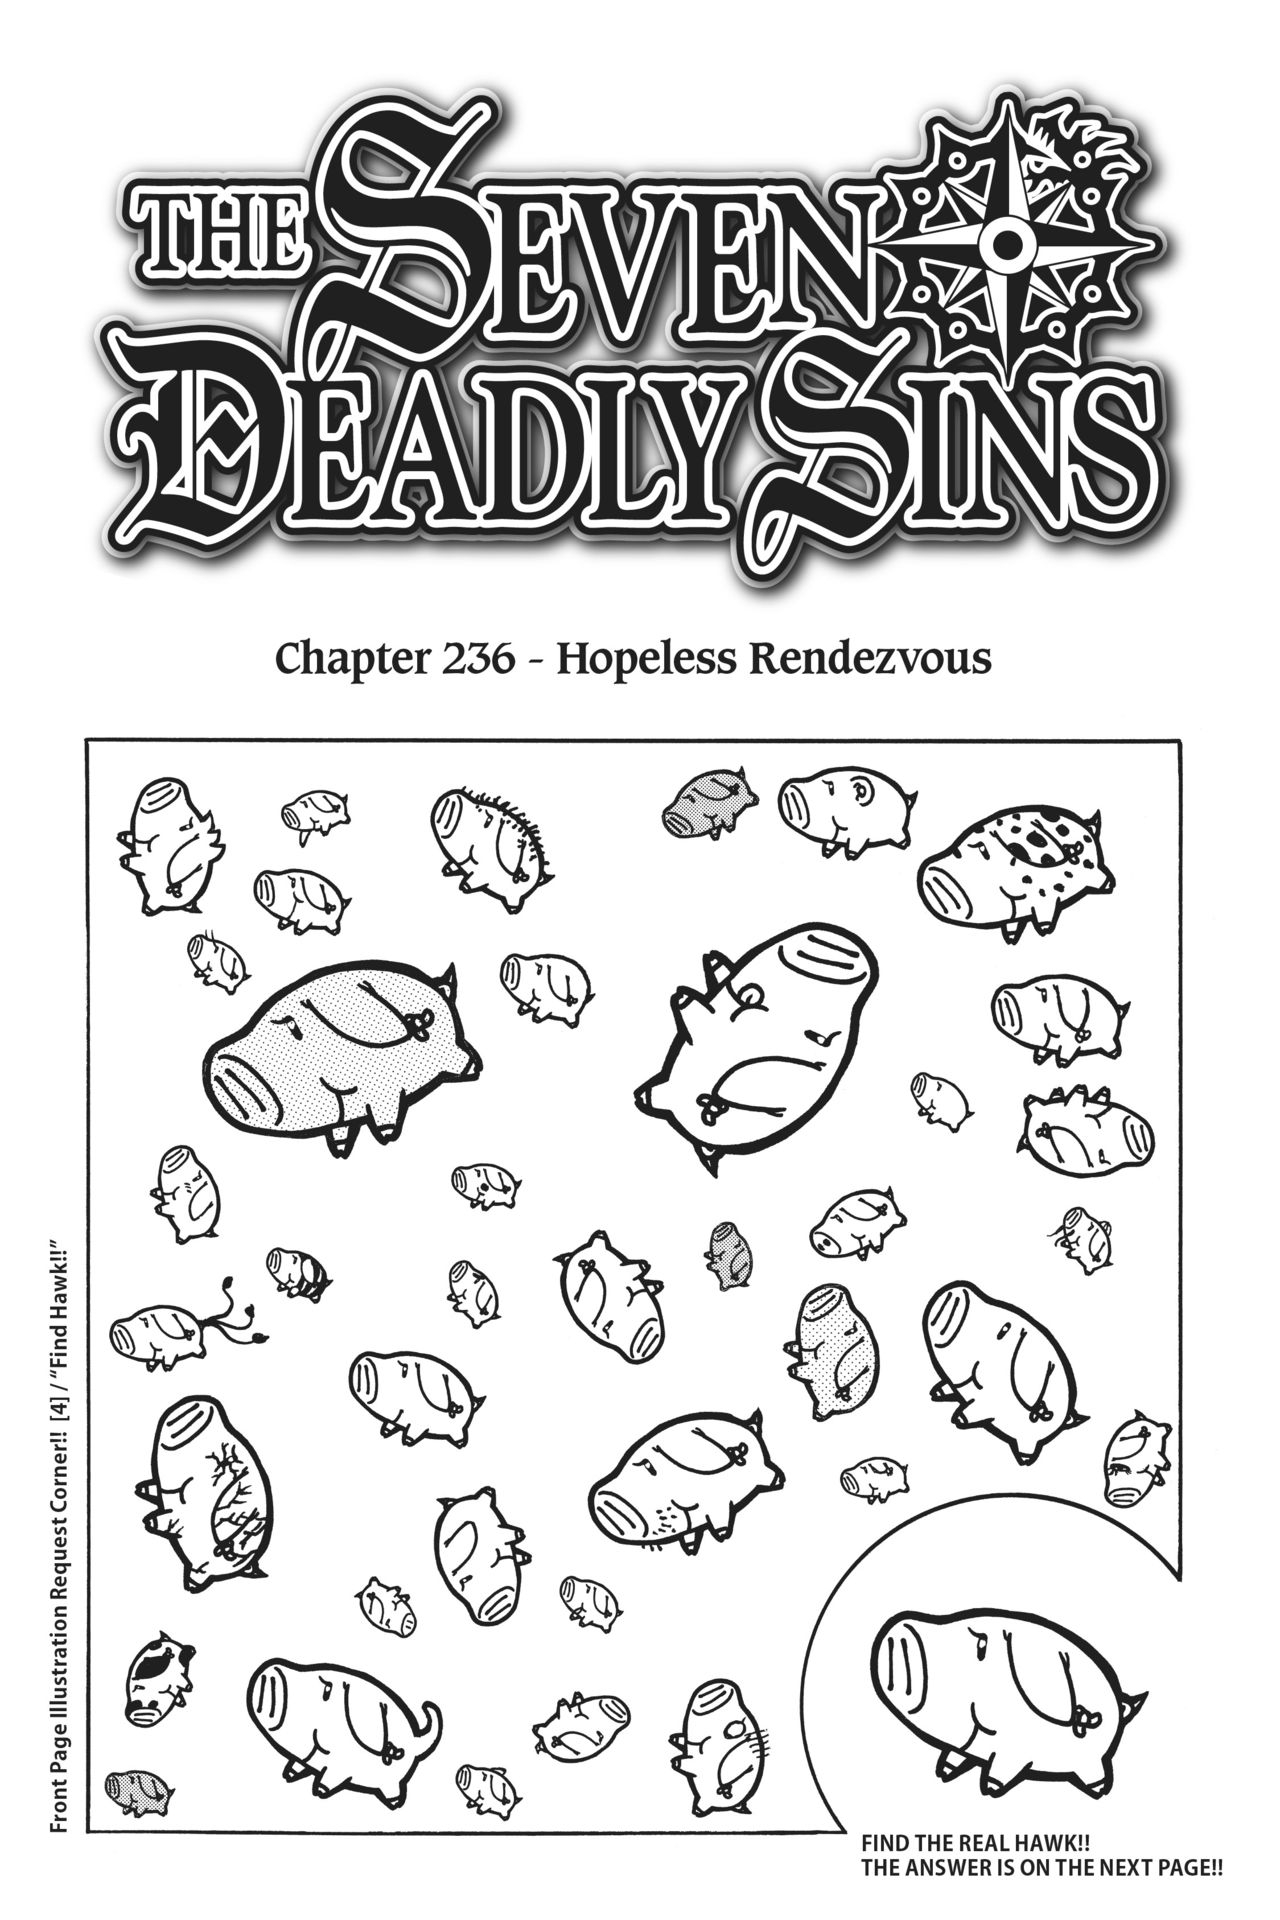 The Seven Deadly Sins (Covers & Chapter Title Cards) 160